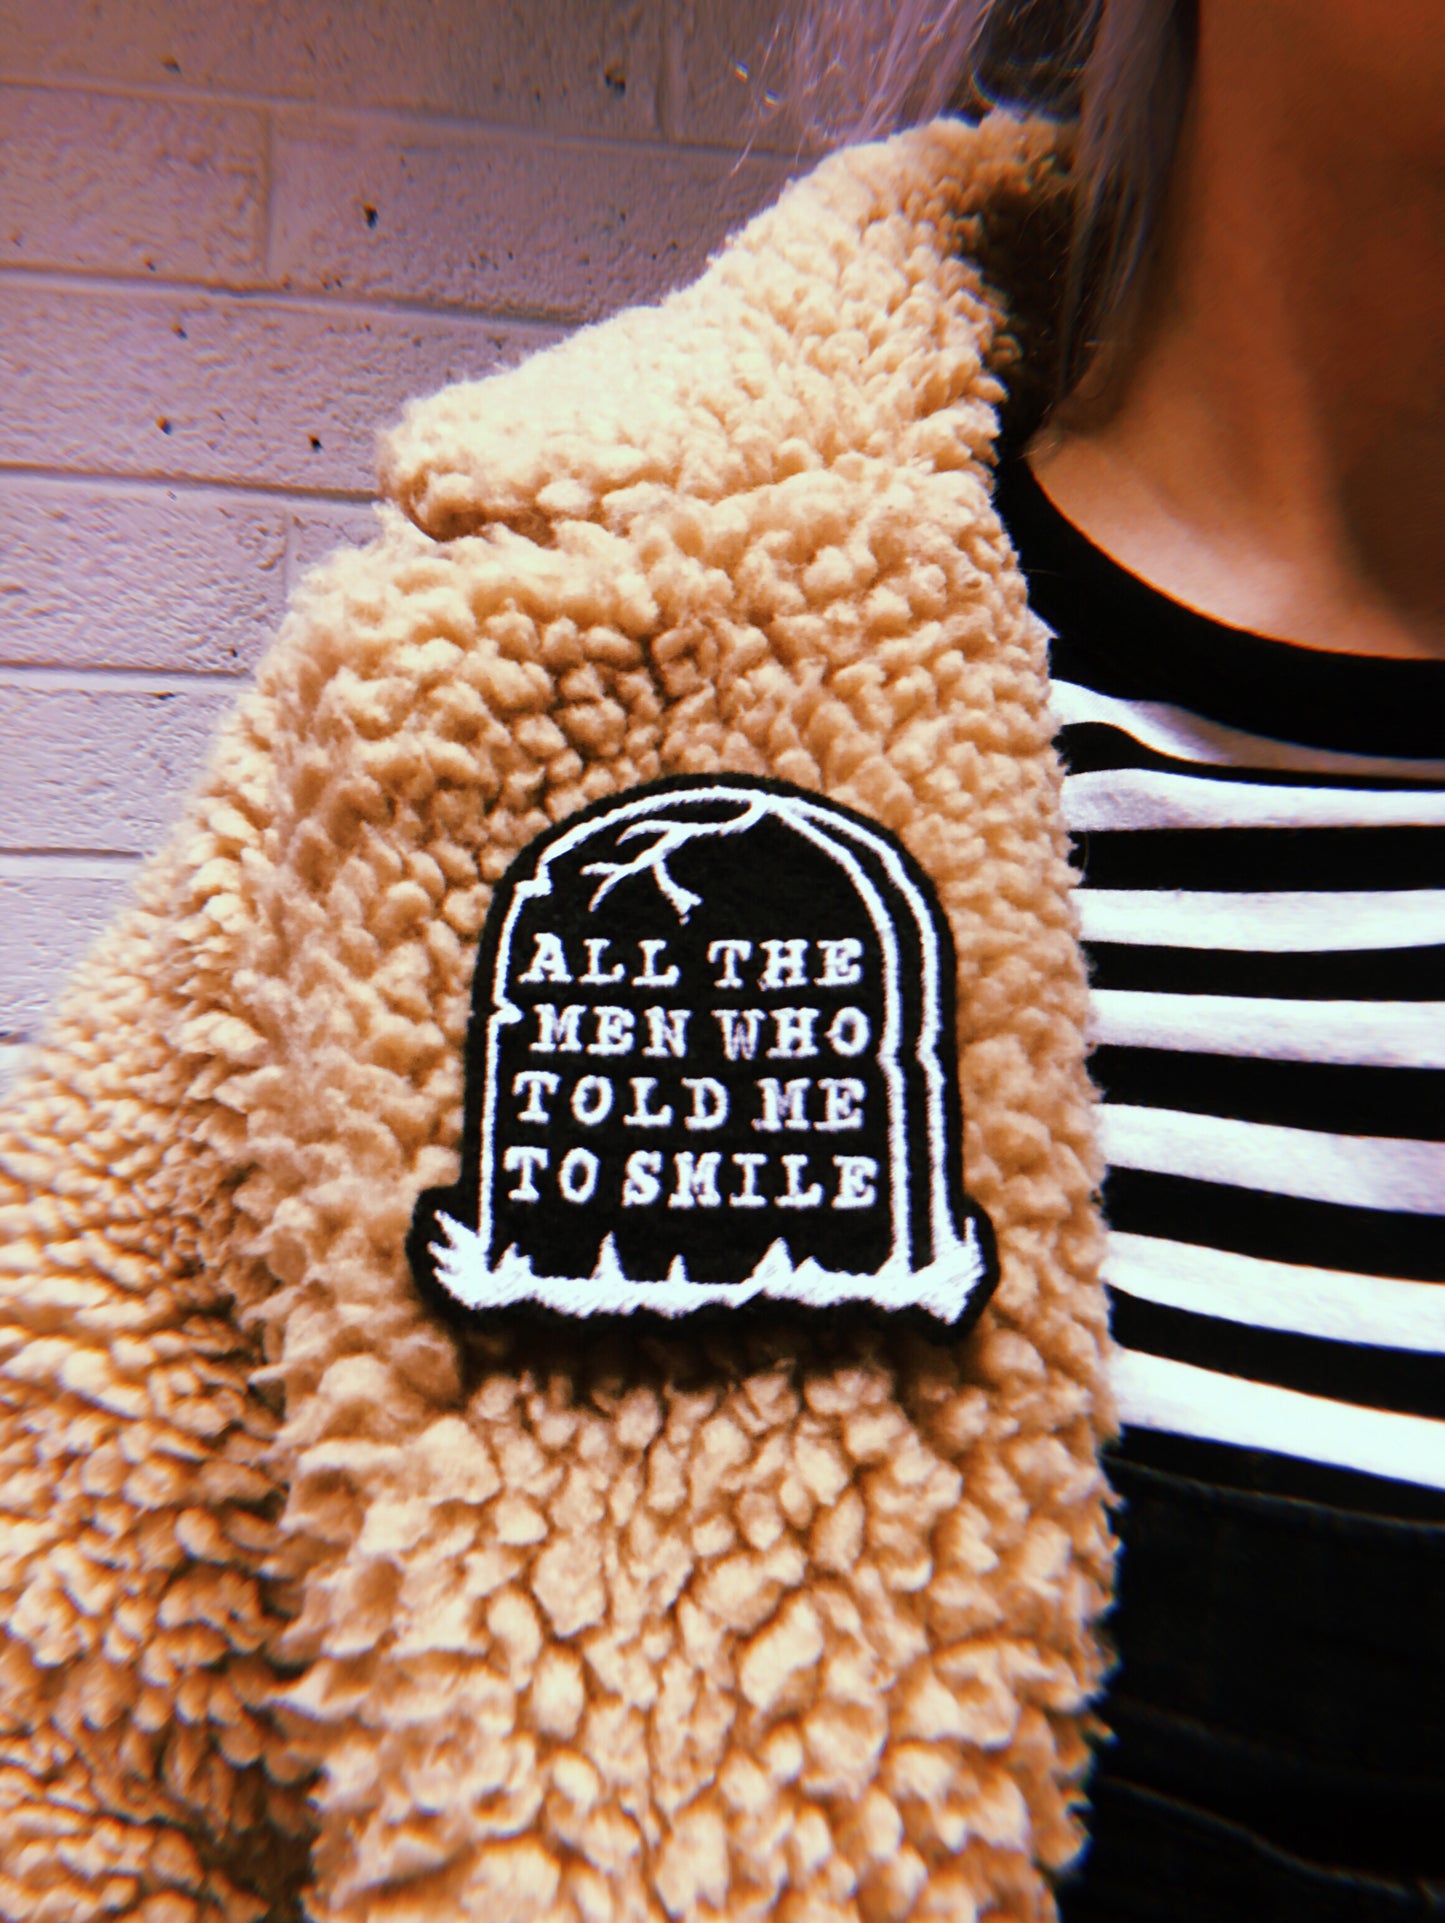 RIP All The Men Who Told Me To Smile - Embroidery Patches